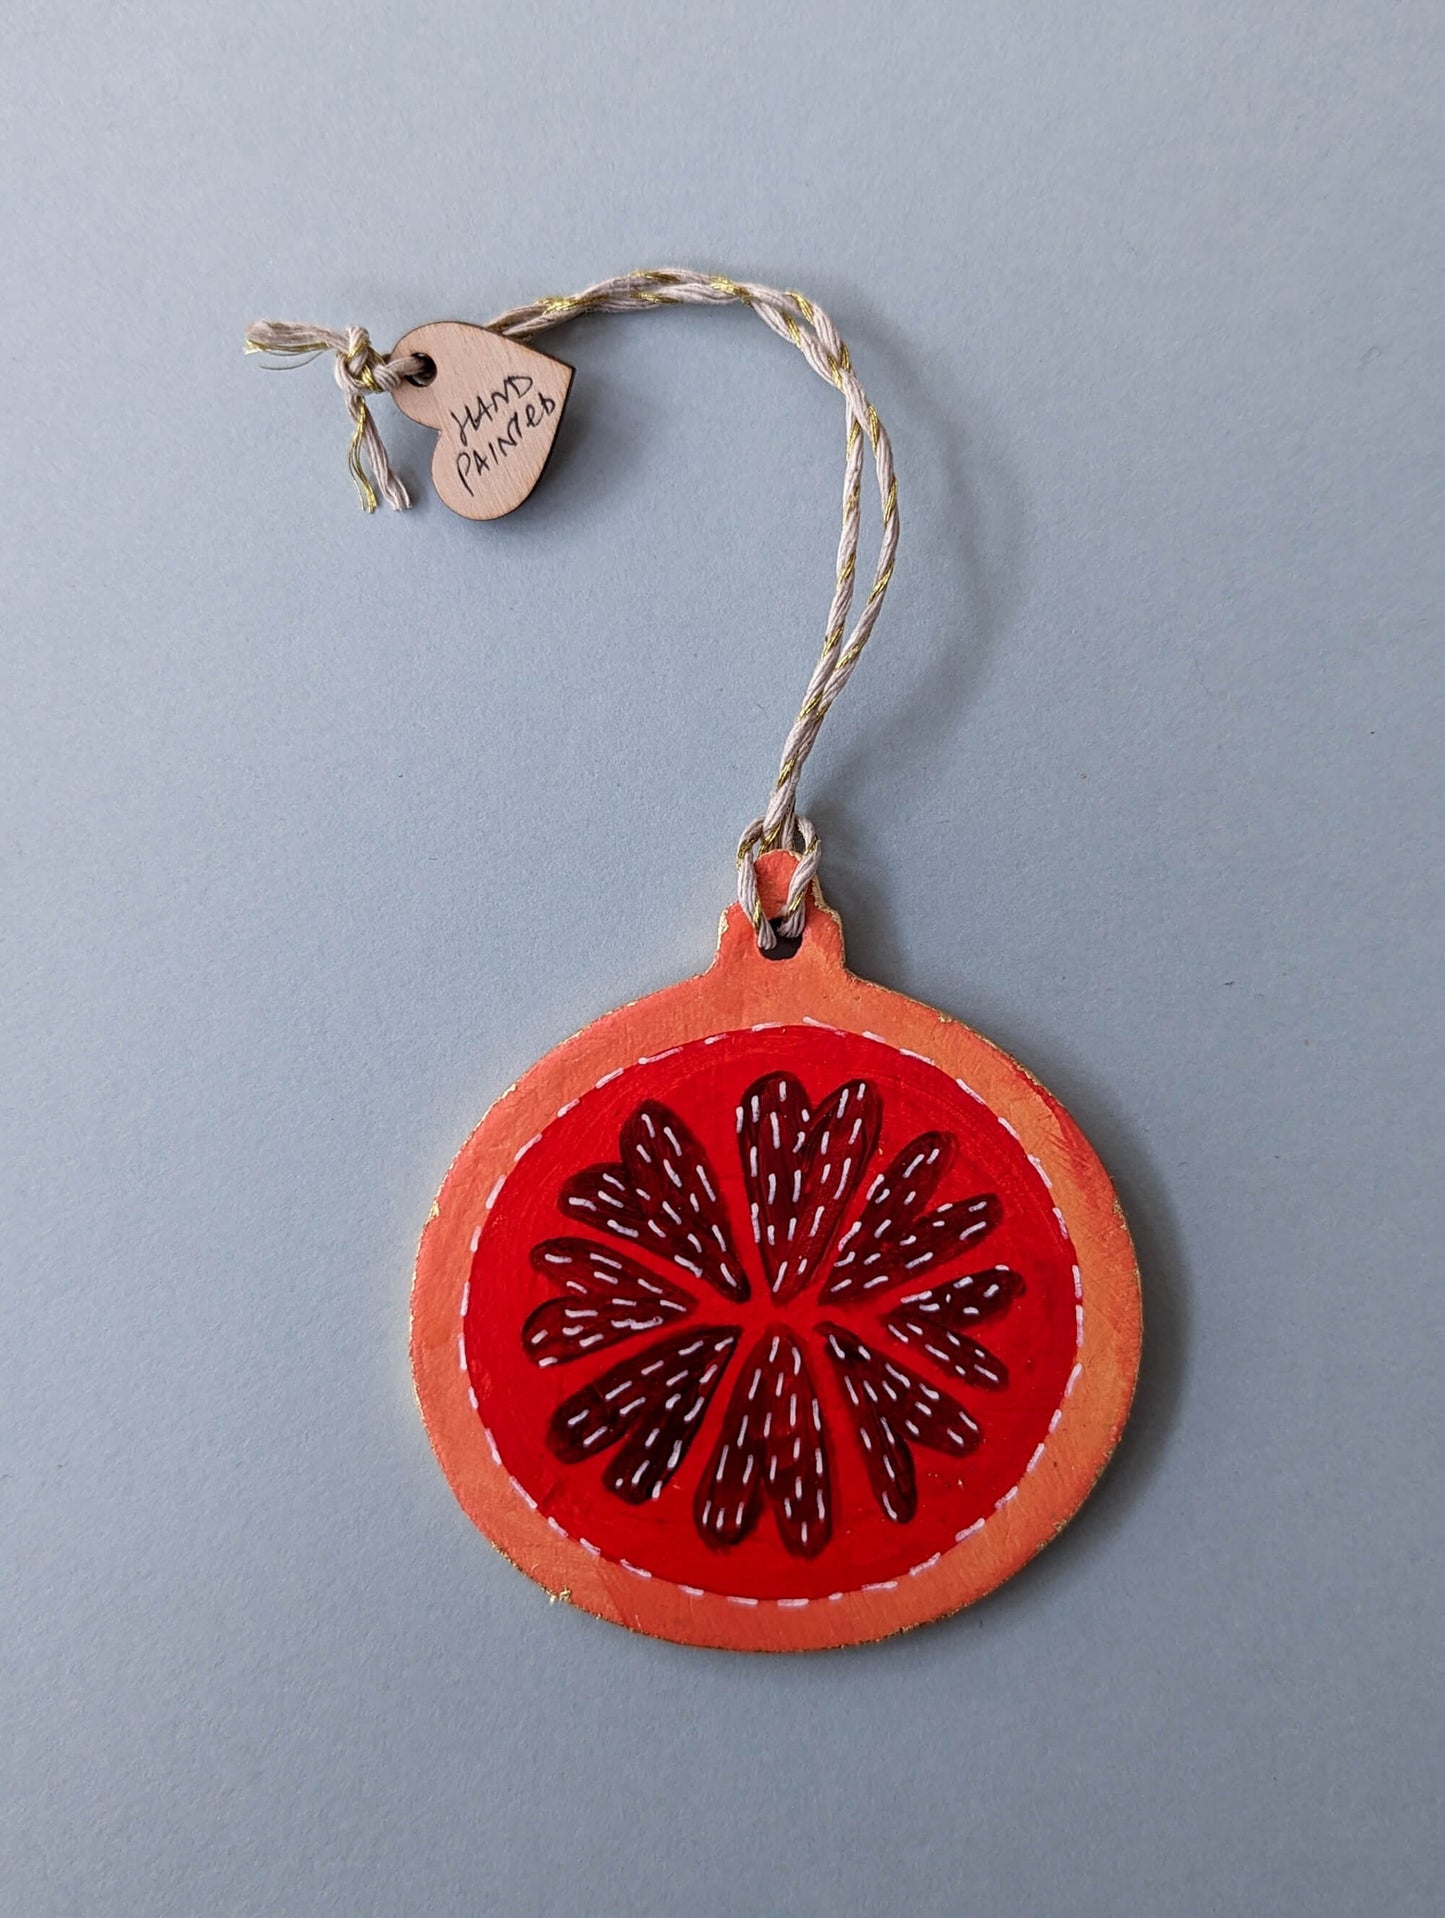 A Candied Orange ornament – hand painted bauble